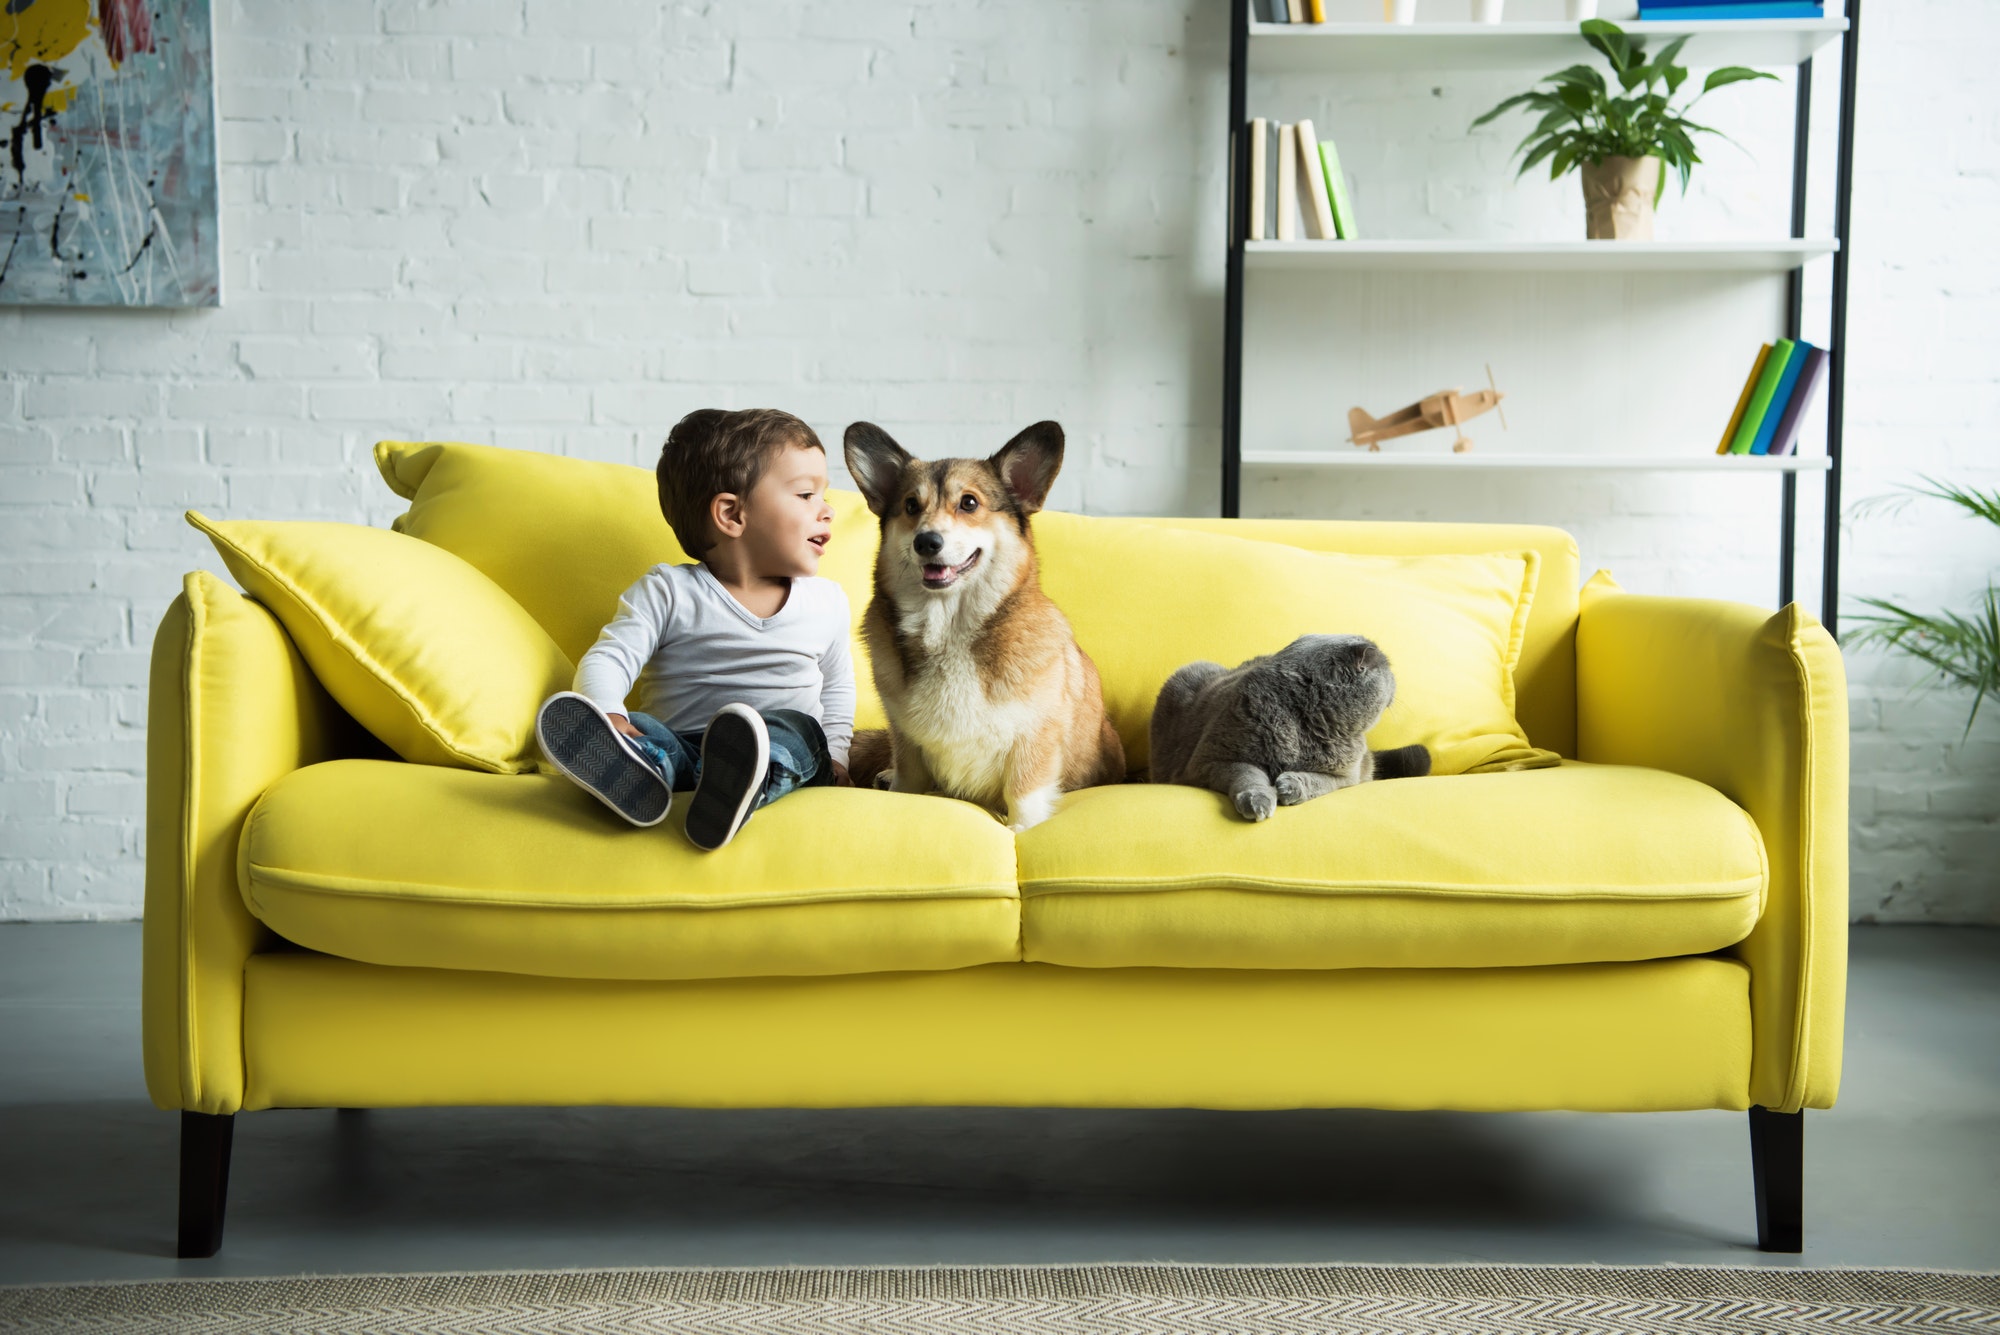 Happy Child Sitting on Yellow Sofa With Pets